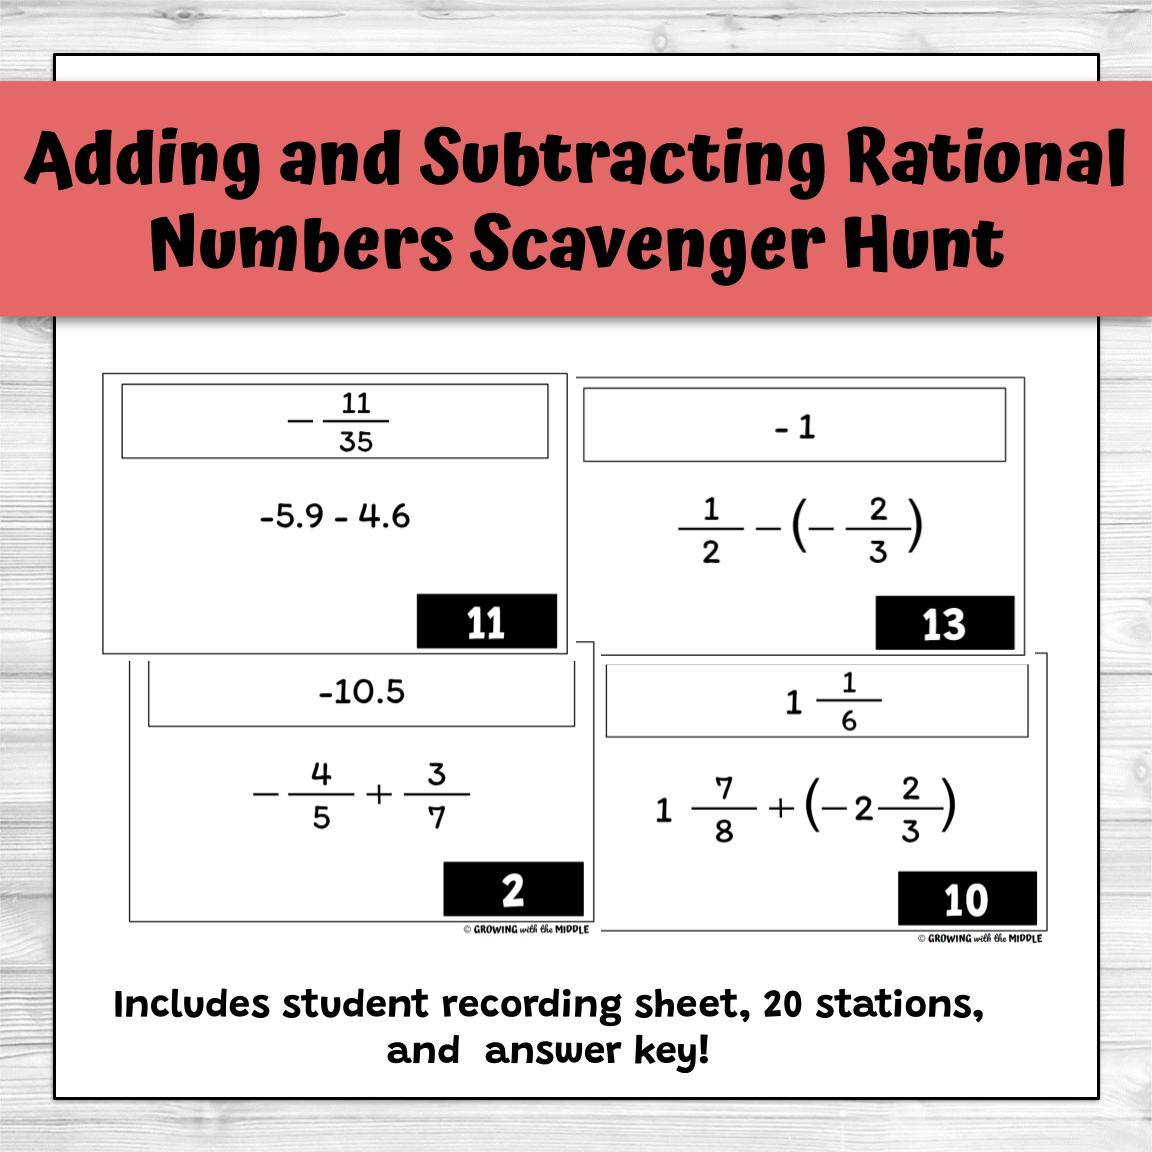 Adding and Subtracting Rational Numbers Scavenger Hunt